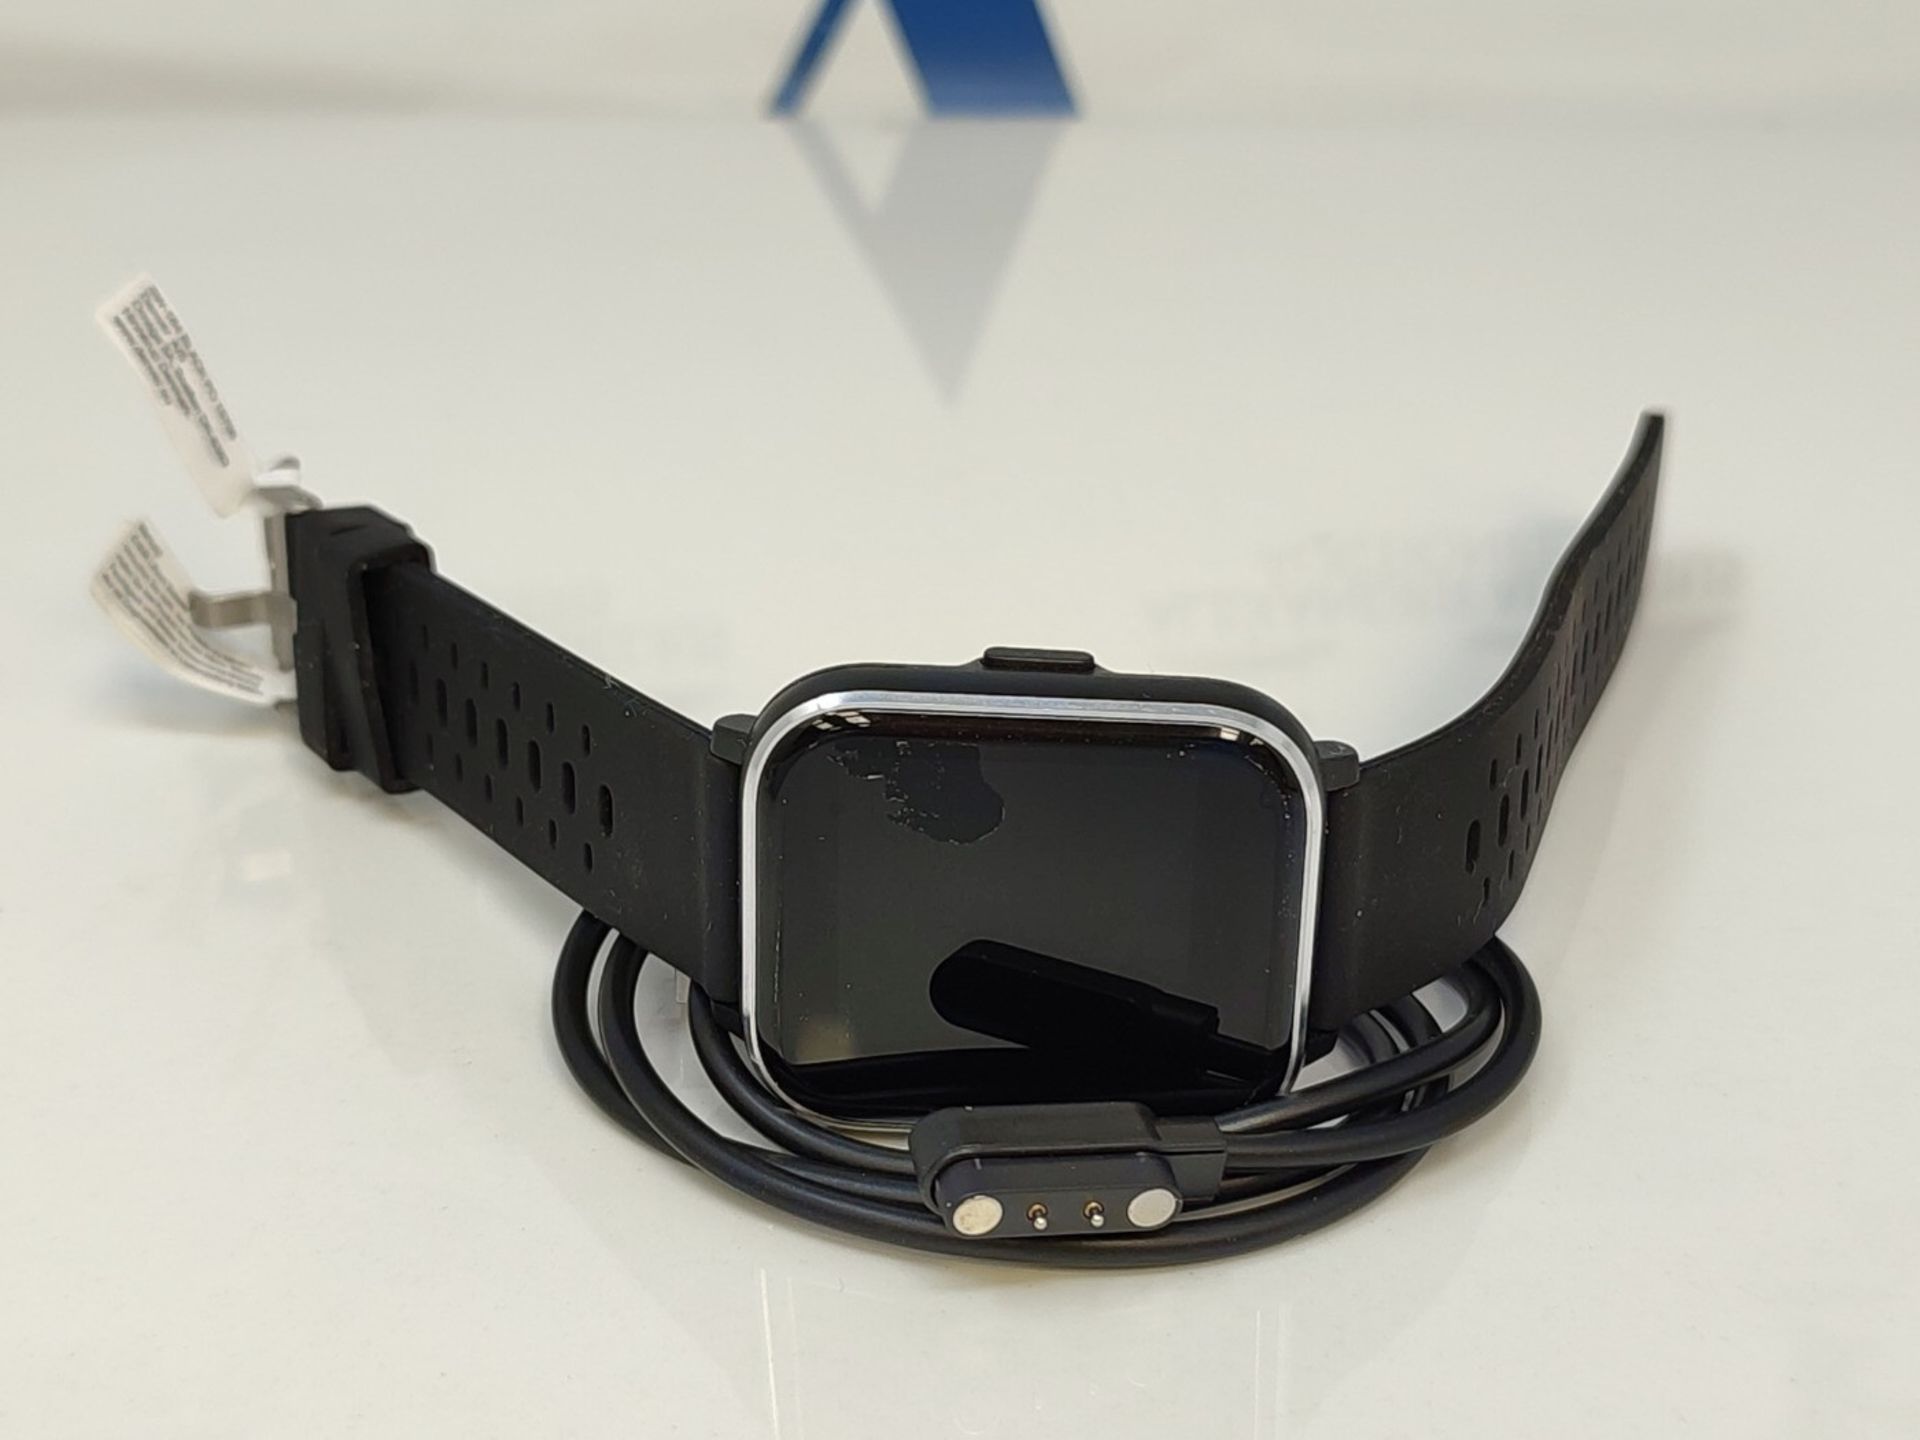 Denver SW-164BLACK, Bluetooth smartwatch, measures body temperature, oxygen and heart - Image 2 of 2